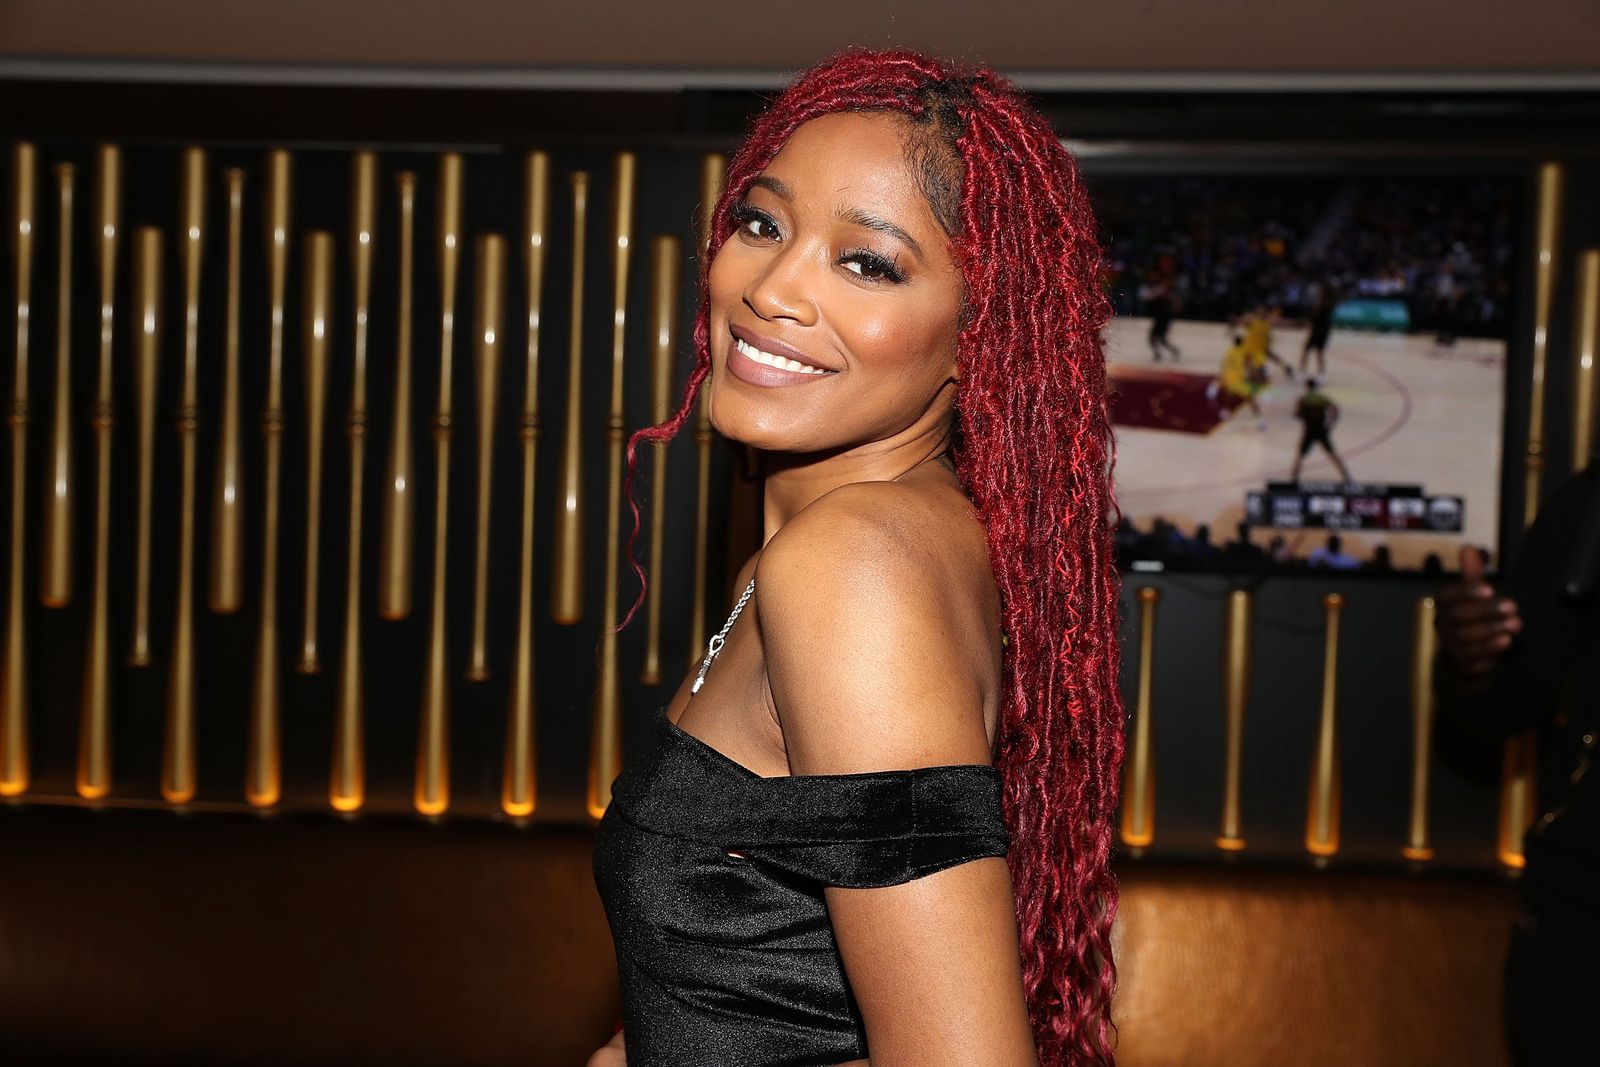 Keke Palmer at her listening party at the 40/40 club in 2018. | Source: Getty Images